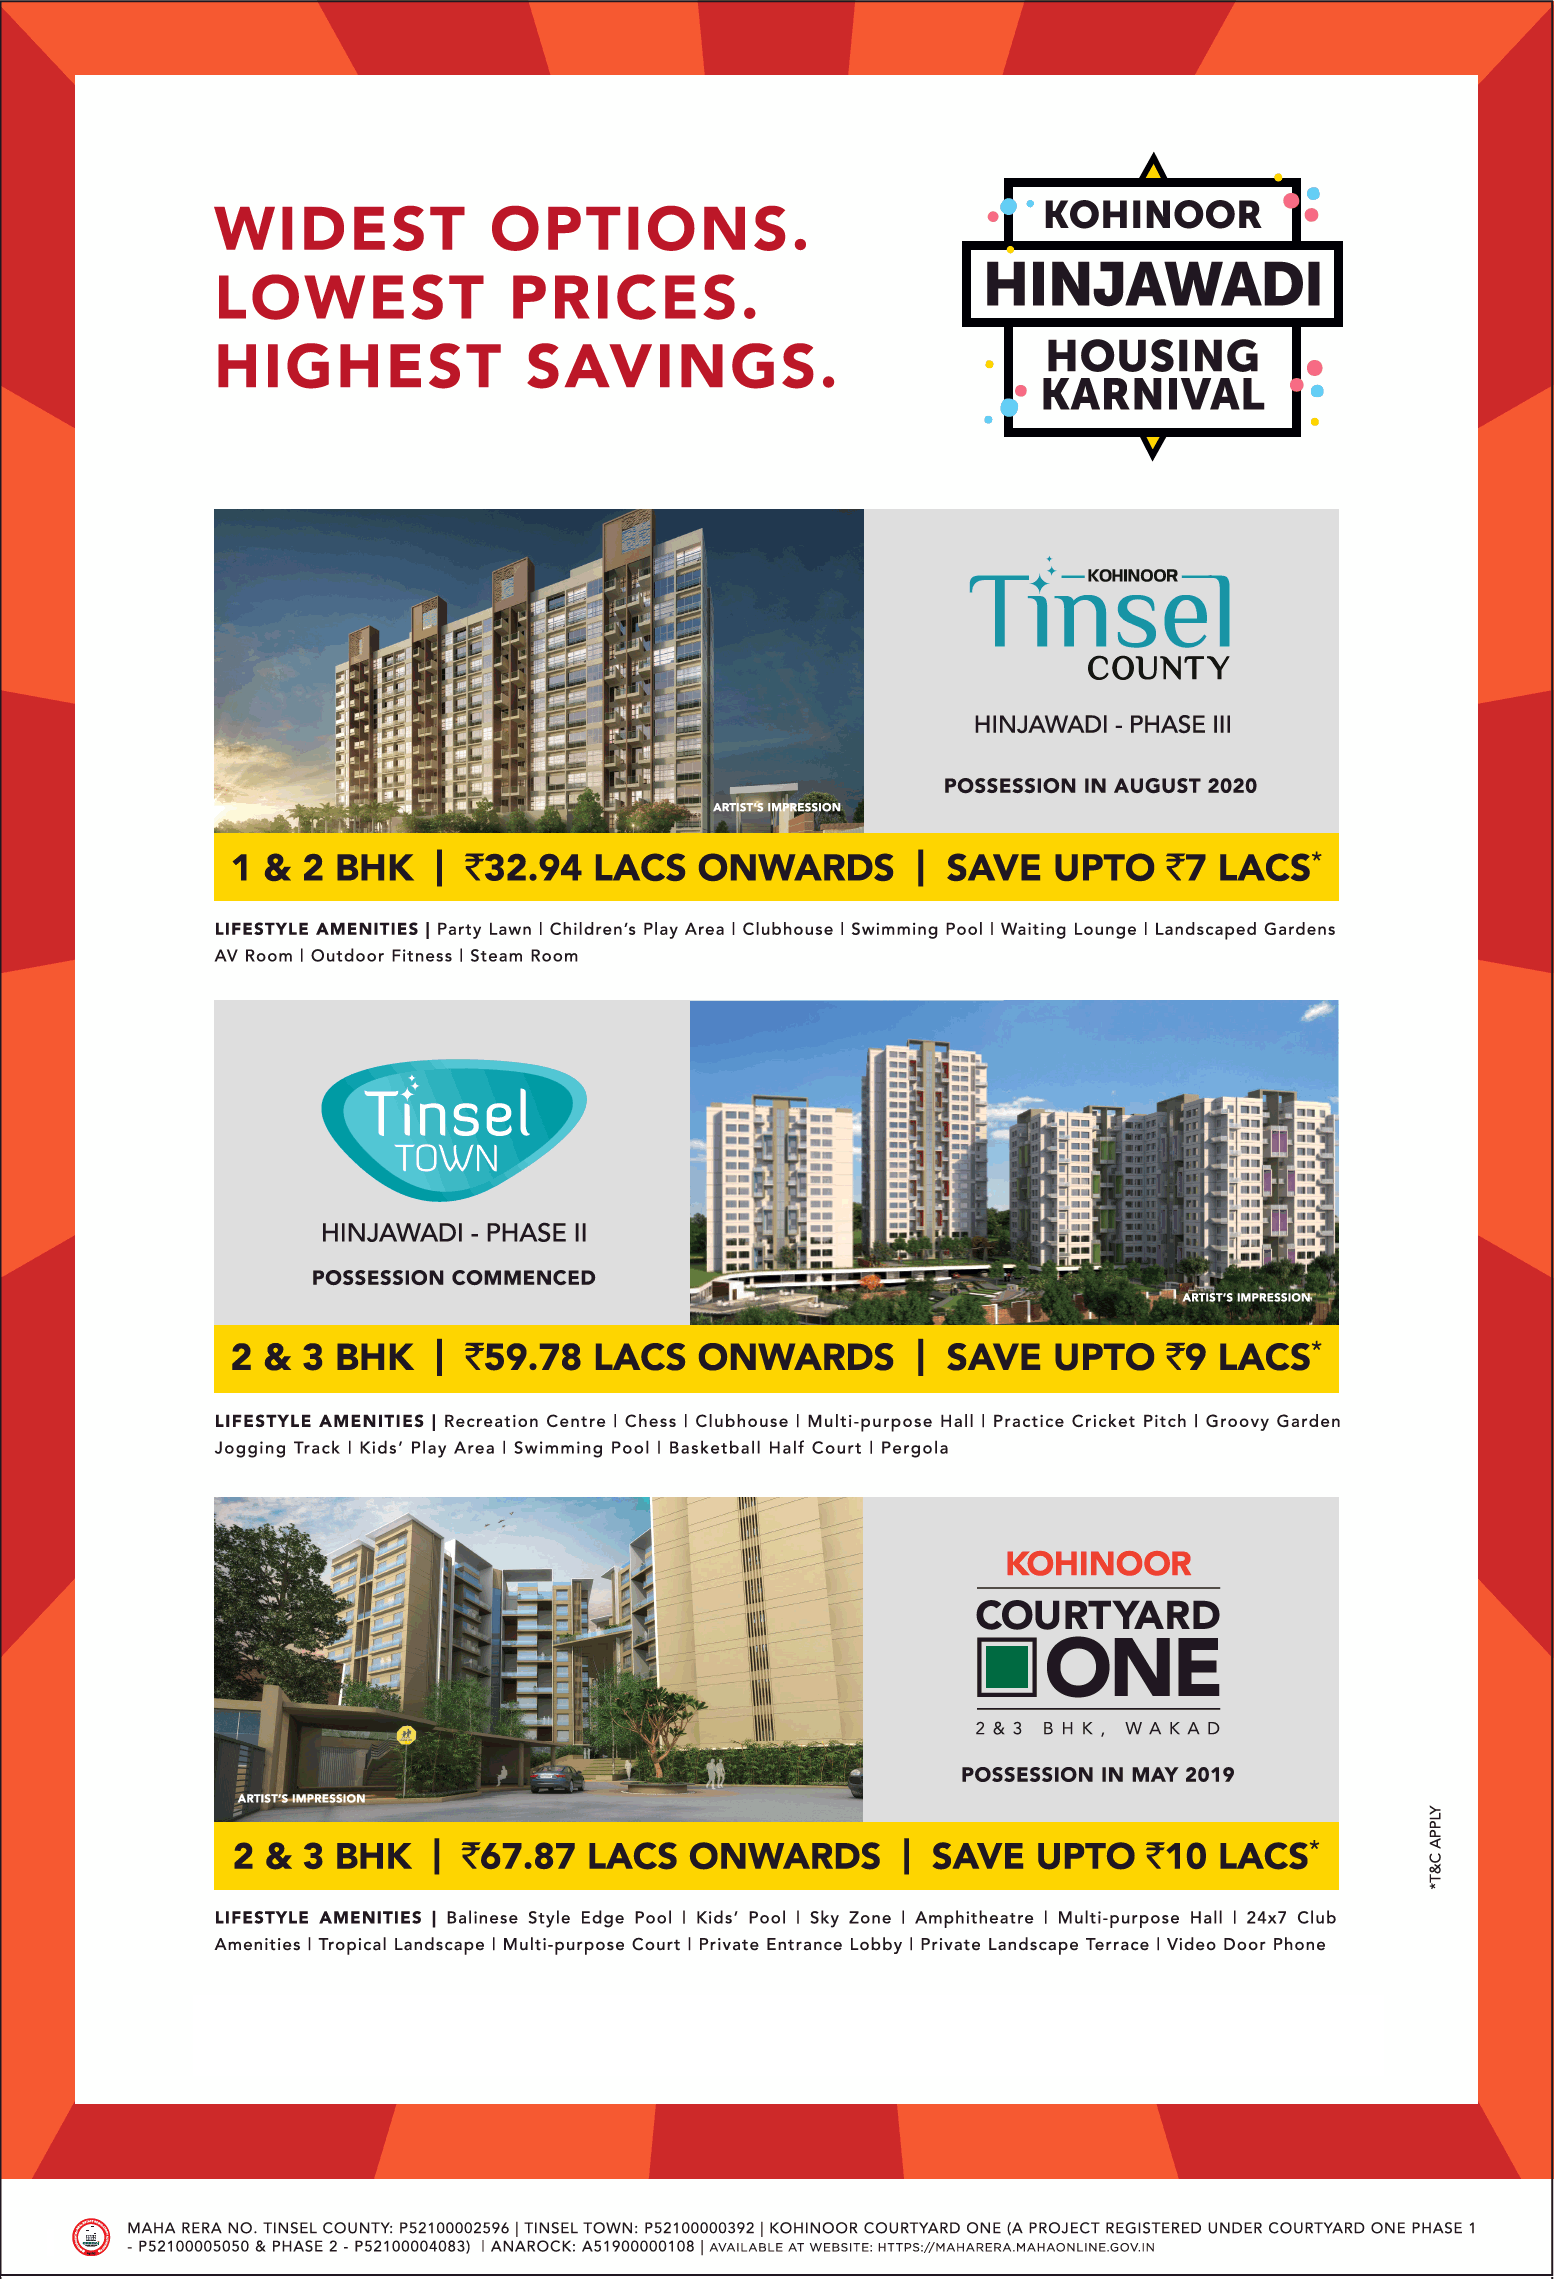 Avail widest options, lowest prices, highest savings at Kohinoor Projects in Hinjawadi, Pune